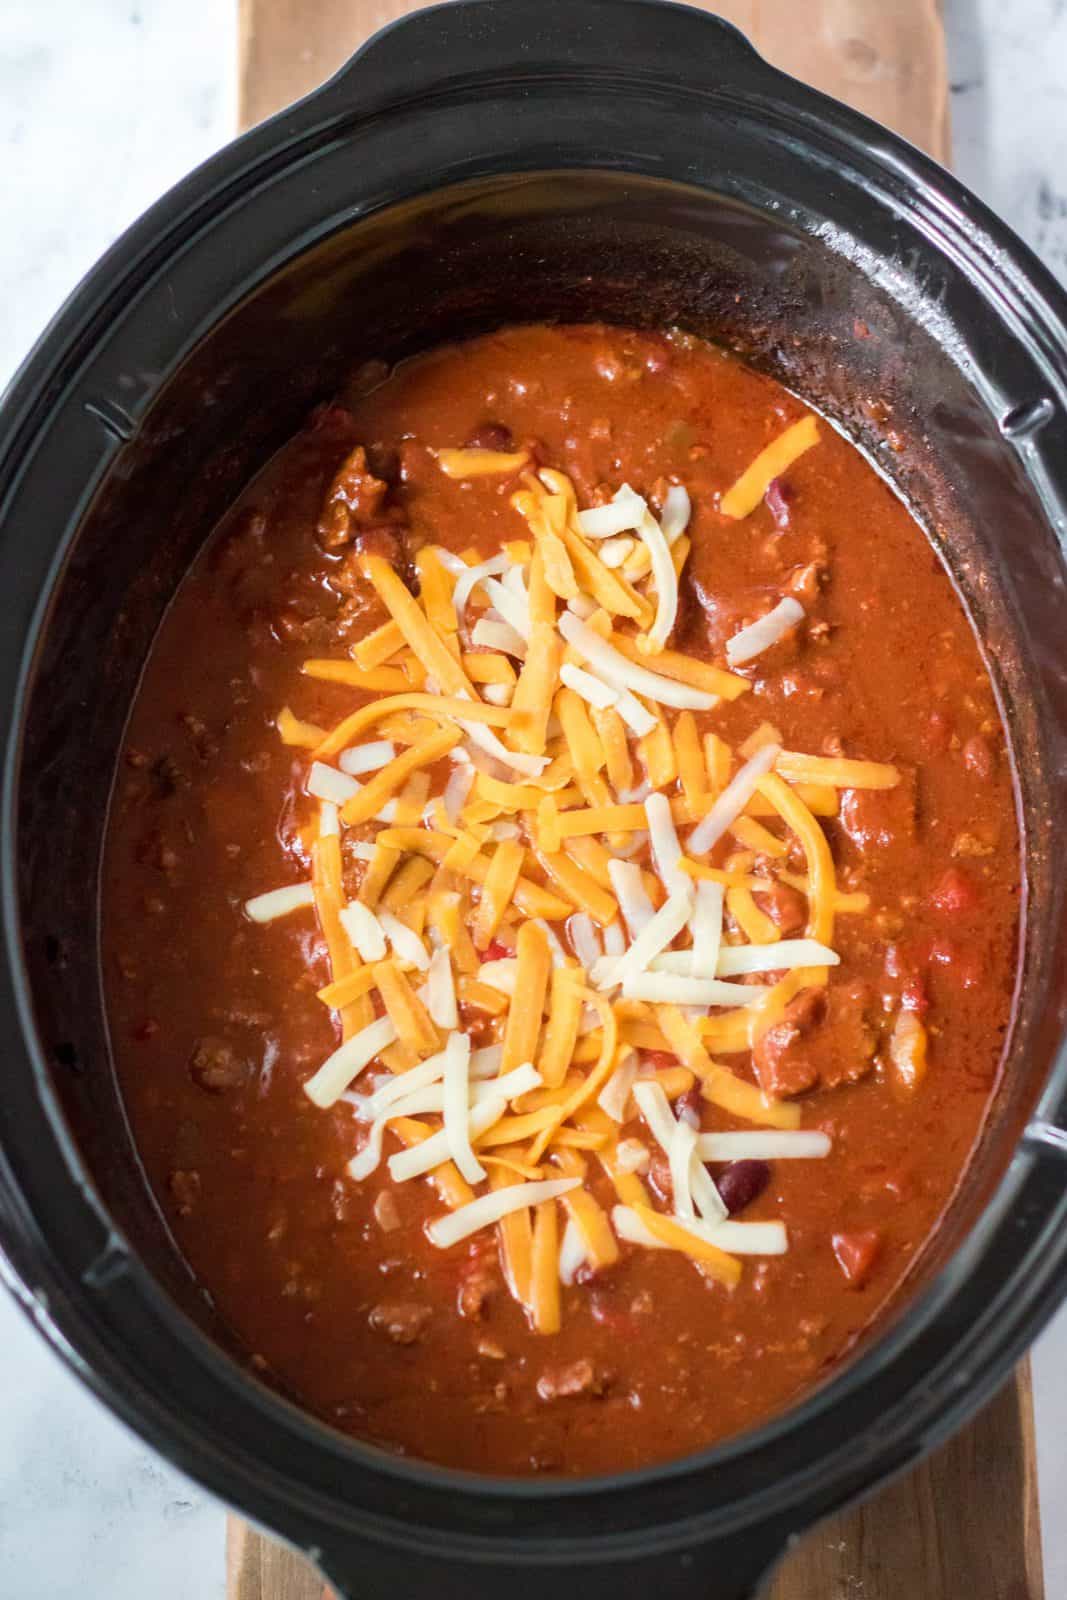 Finished chili topped with cheese in slow cooker.